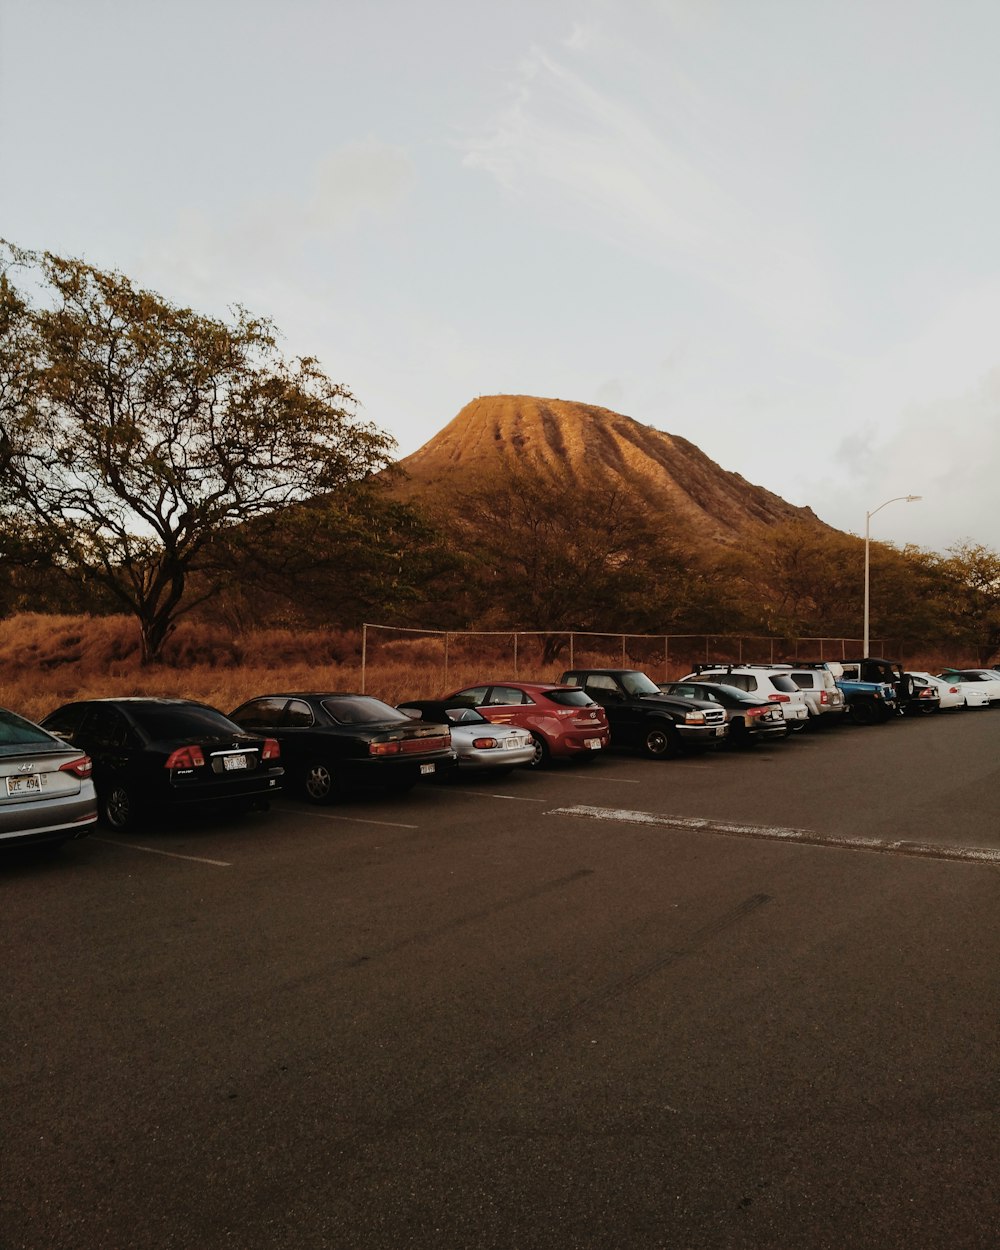 cars parked on parking lot near brown mountain under white clouds during daytime